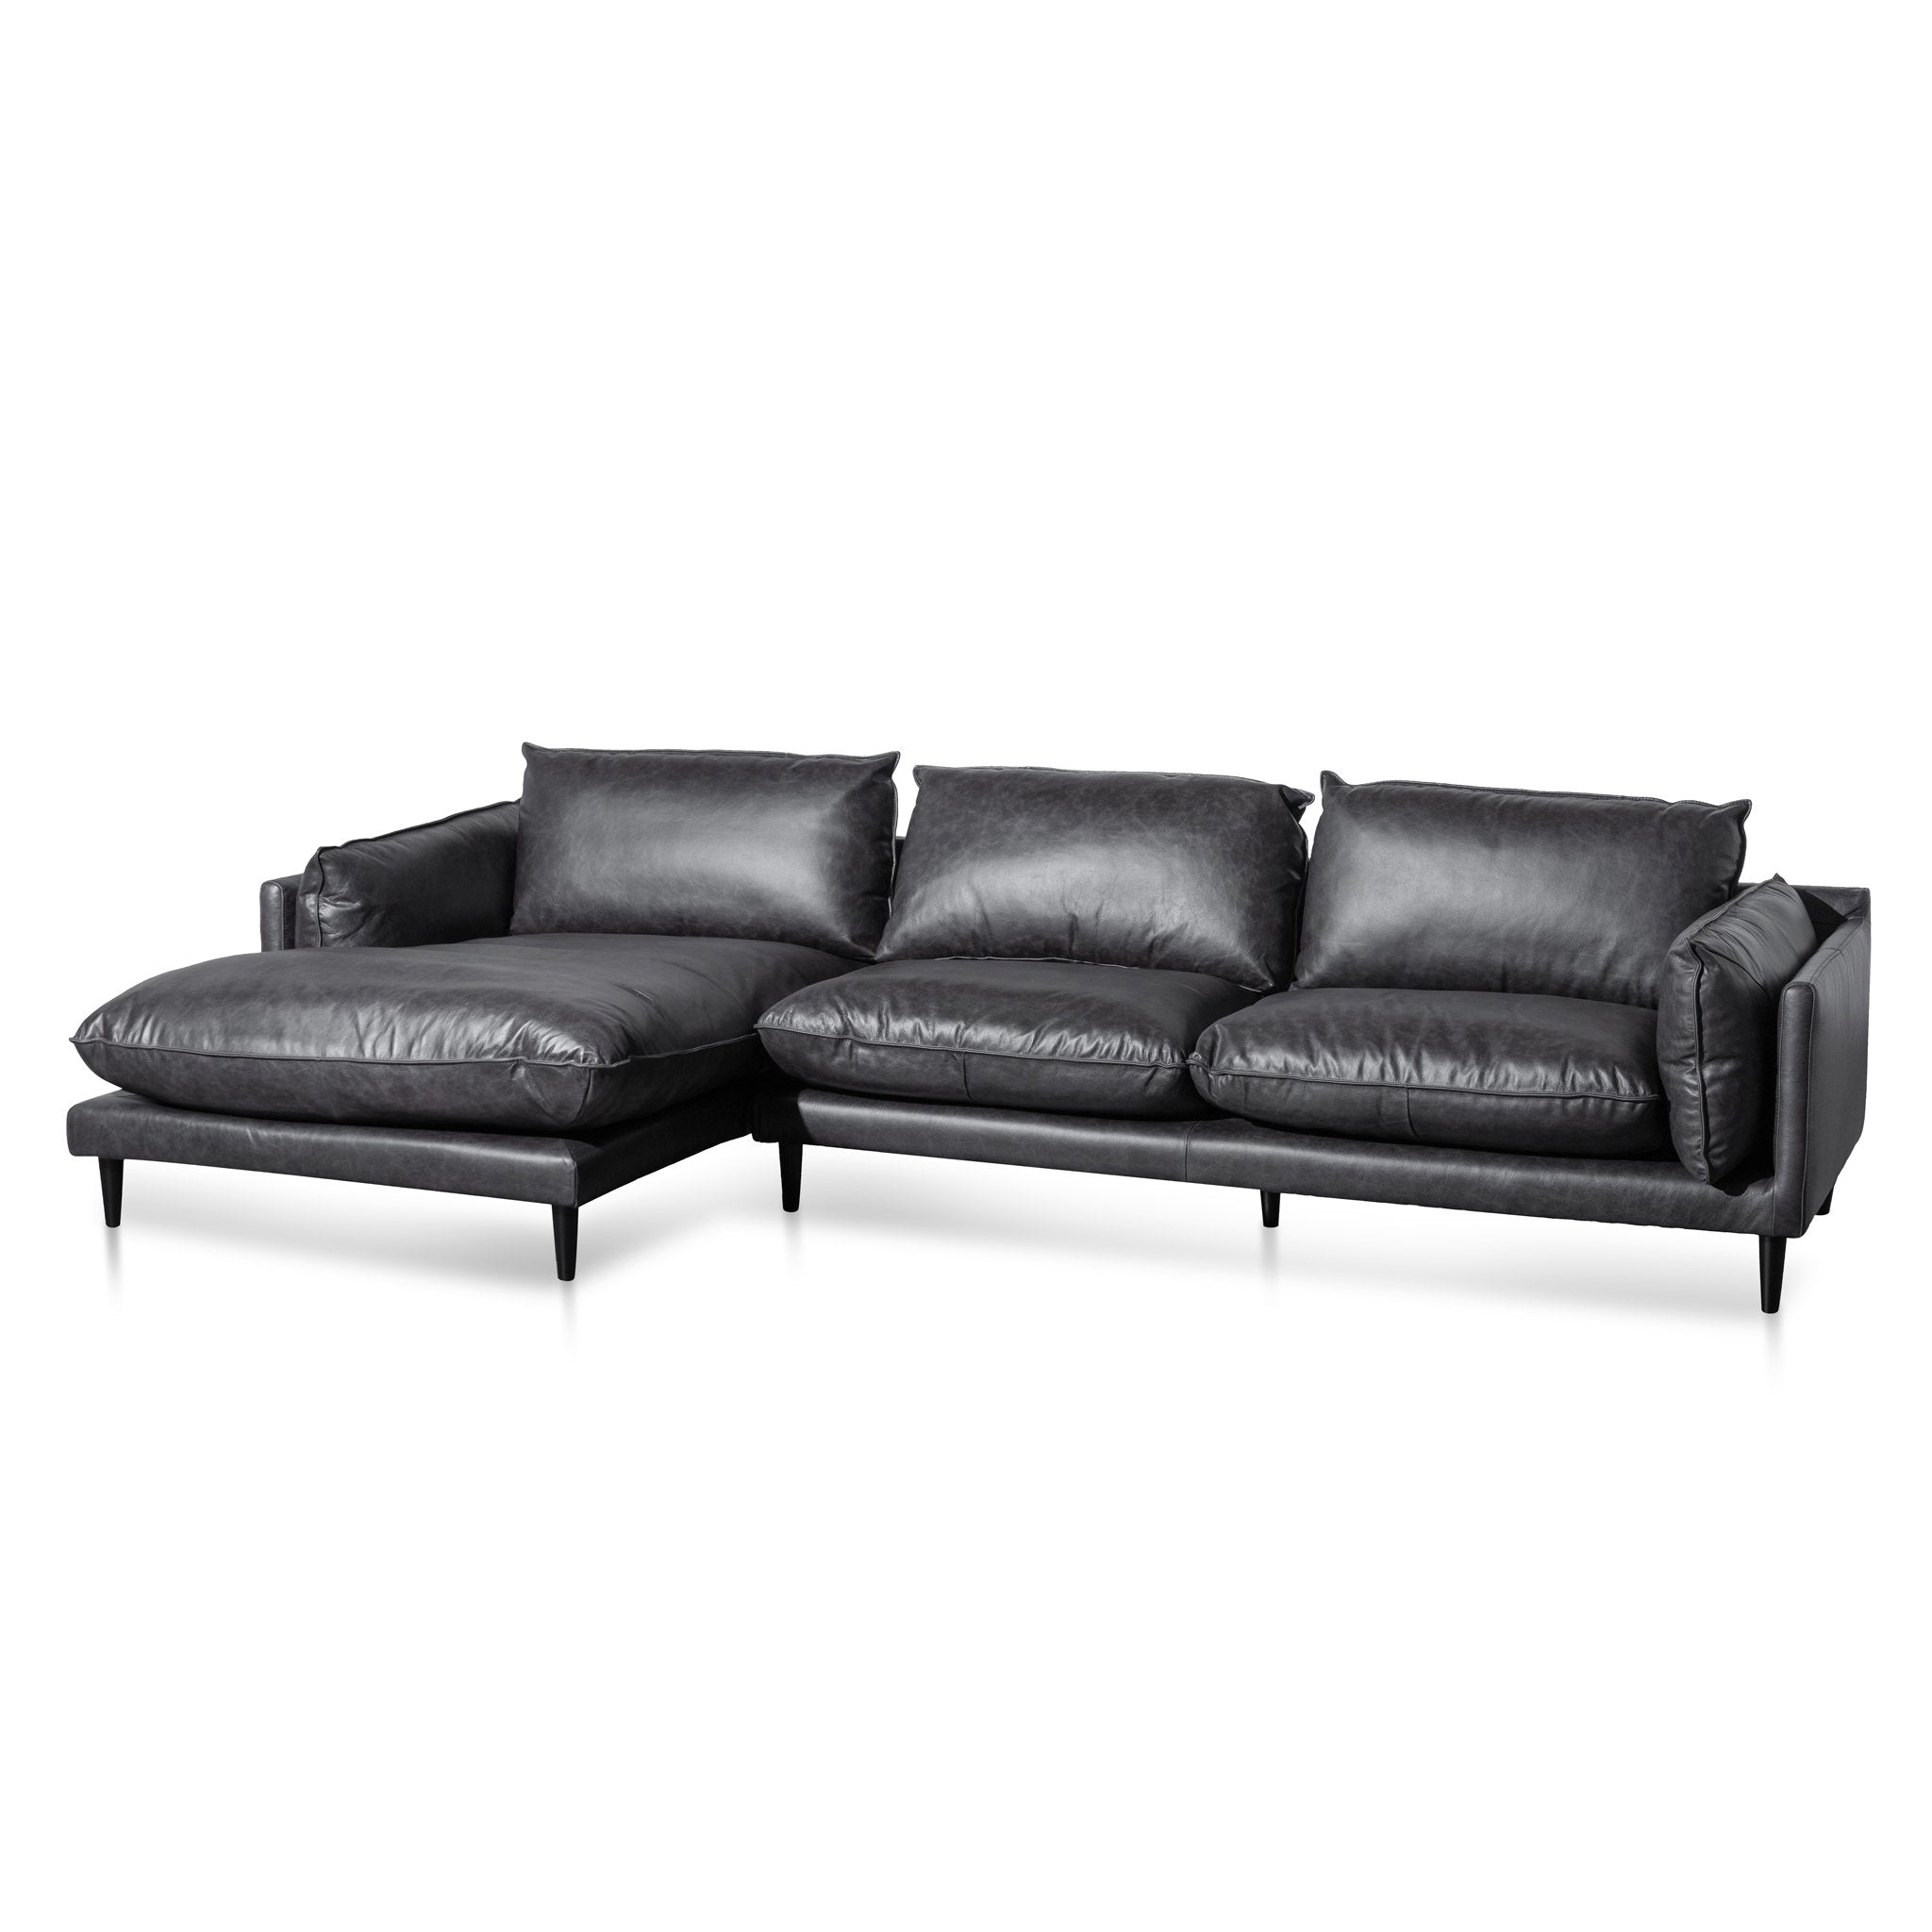 Savannah 4 Seater Left Chaise Leather Sofa - Charcoal